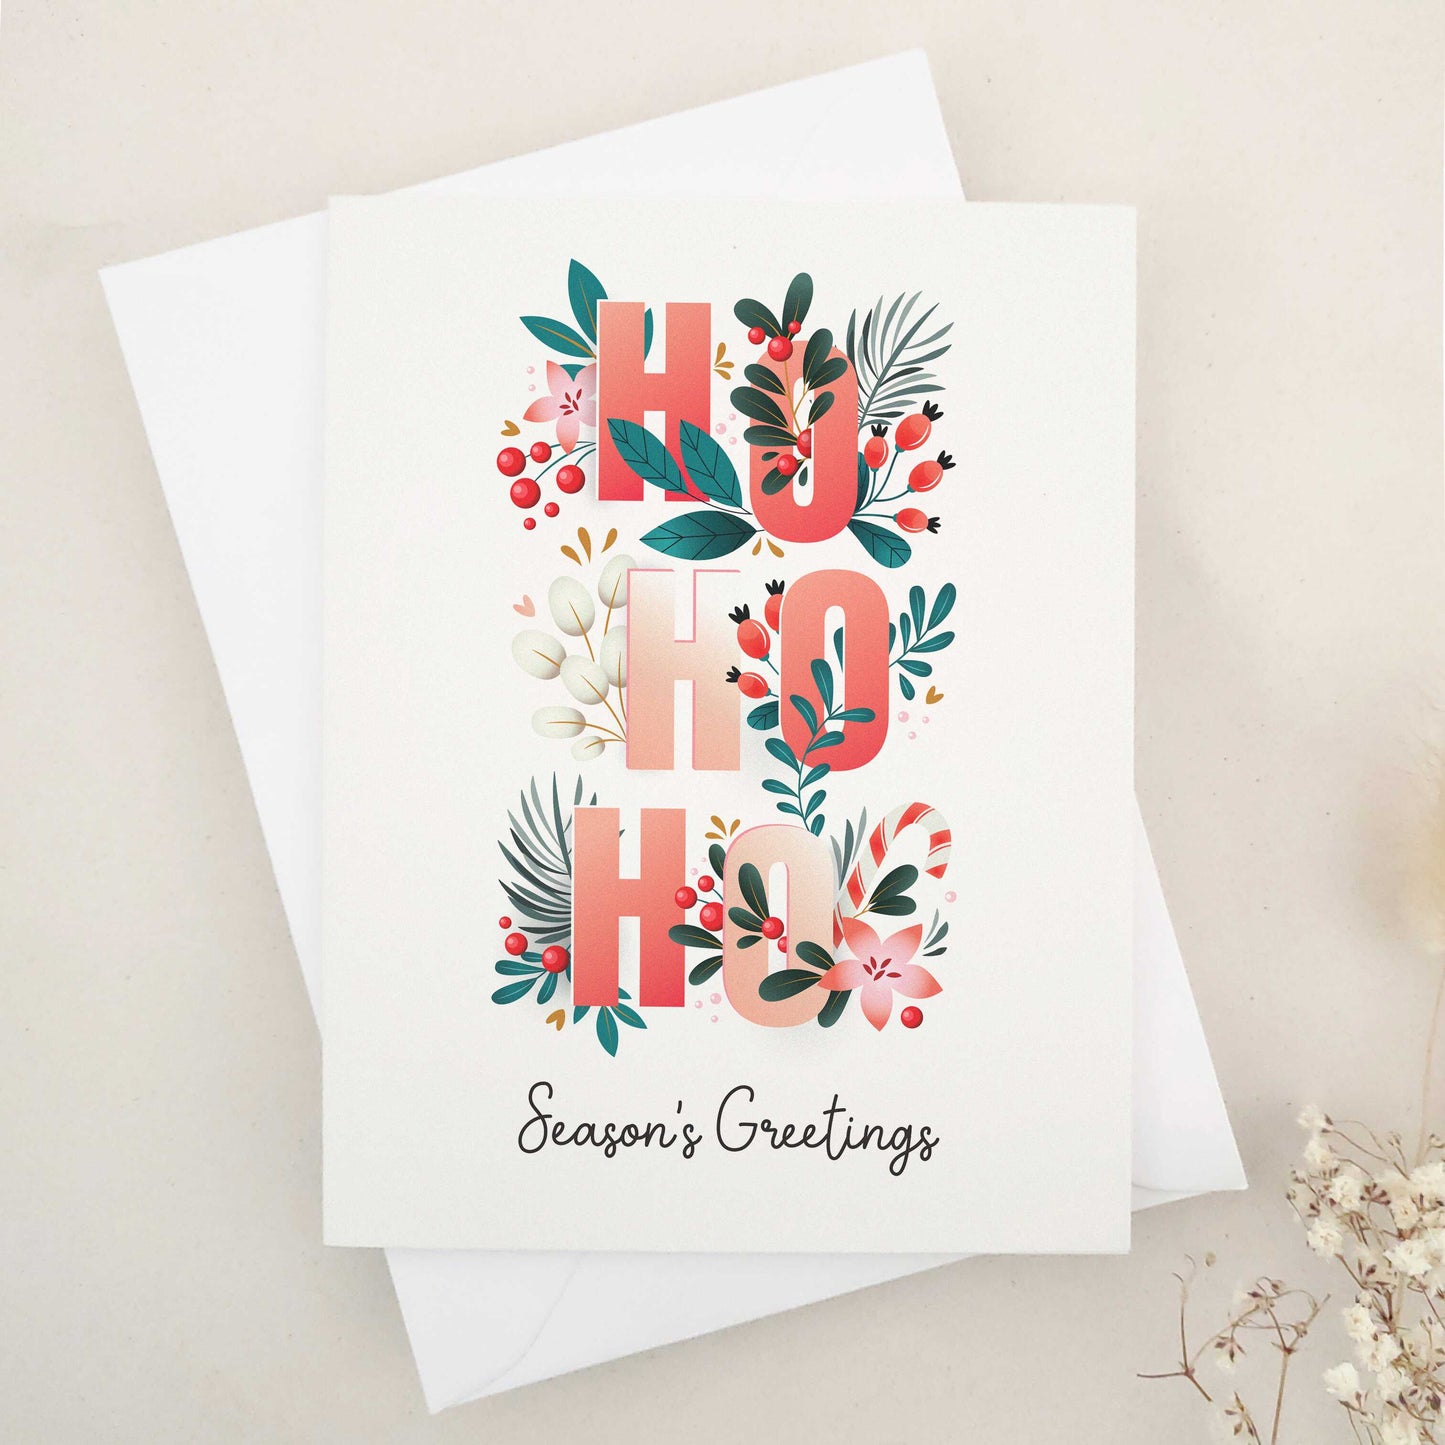 Spread holiday cheer with our beautifully crafted 'Ho Ho Ho' Season's Greetings card, featuring festive flowers, Christmas berries, and a playful 'Ho Ho Ho' typographic arrangement, a heartfelt way to celebrate the season.